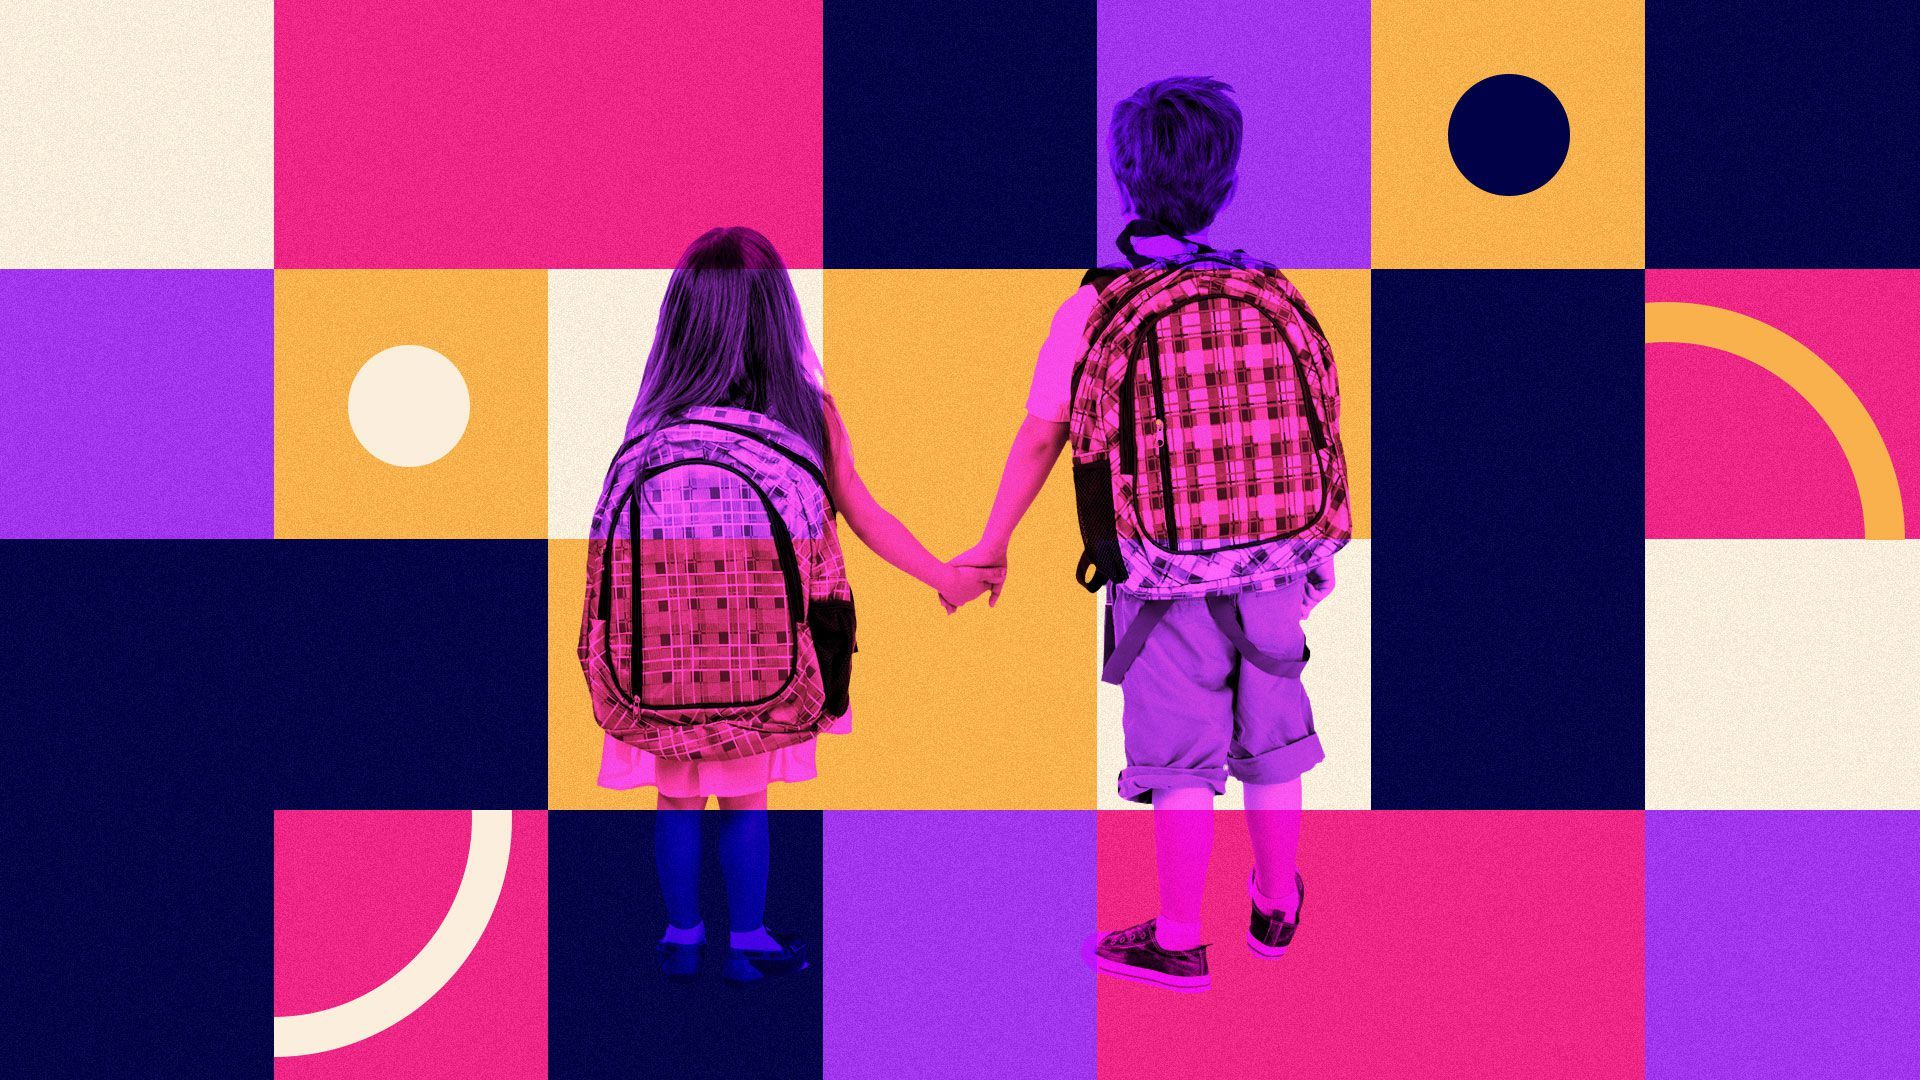 Illustration of children facing away with backpacks holding hands with a grid background and circles